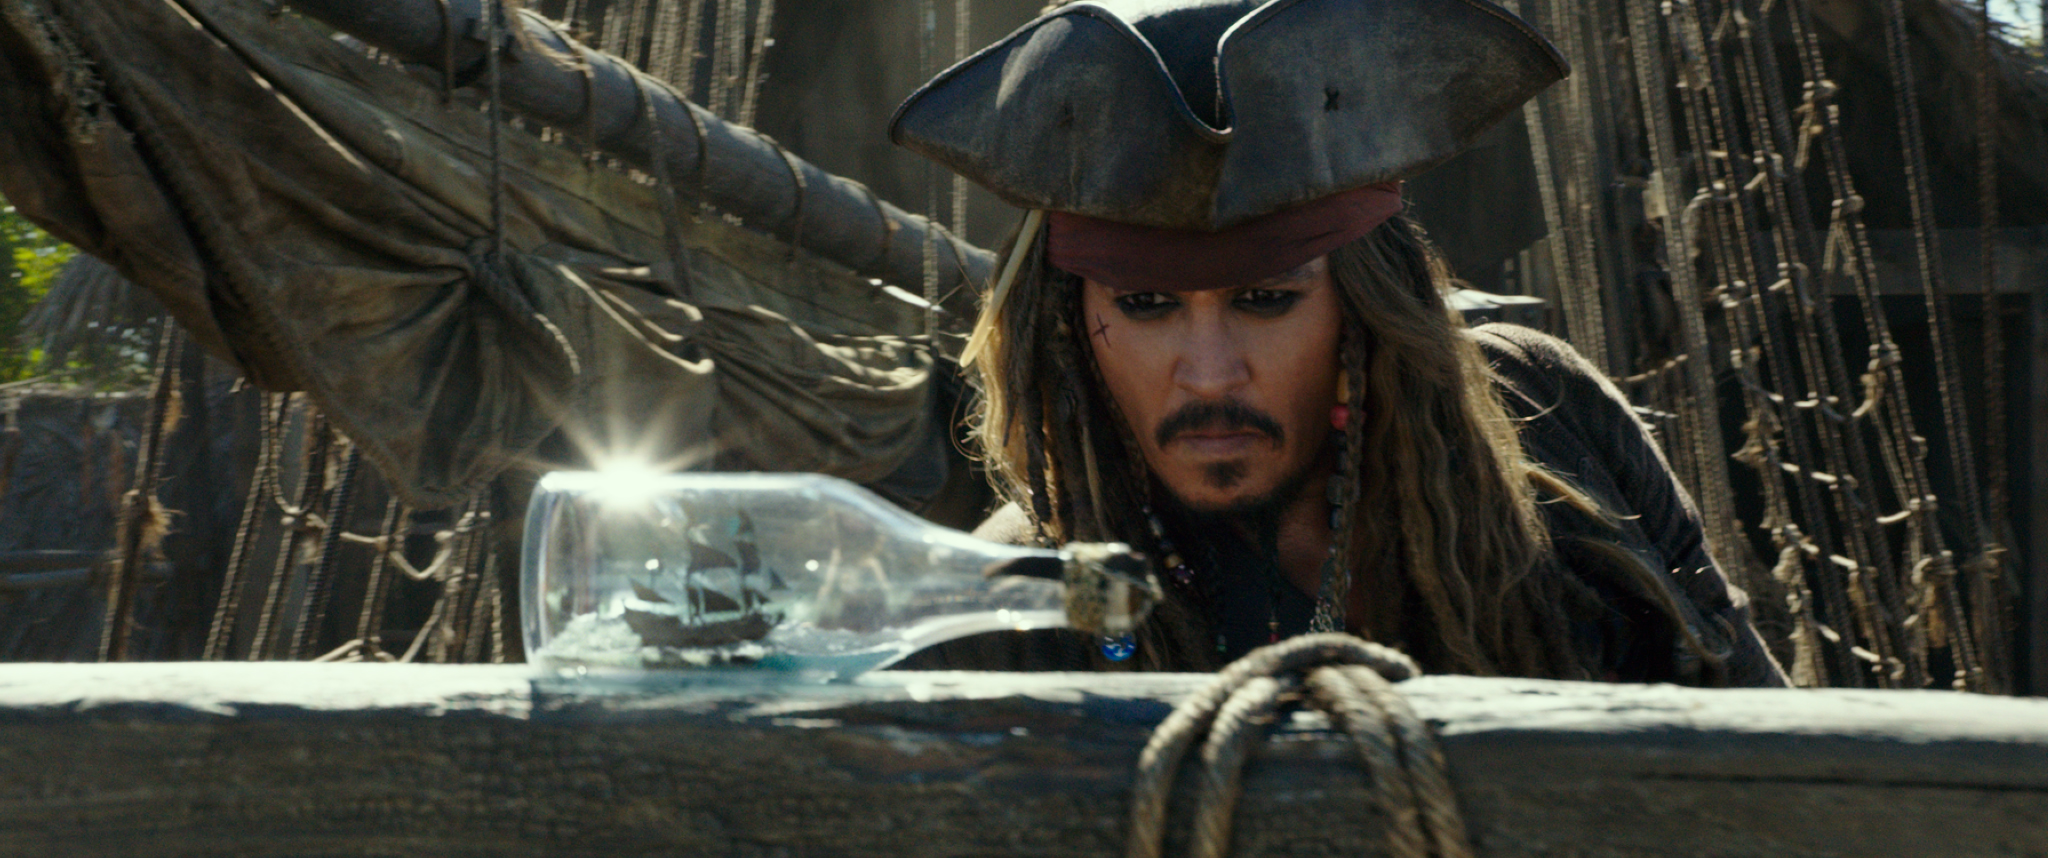 Early "Pirates of the Caribbean: Dead Men Tell No Tales" Reactions from CinemaCon